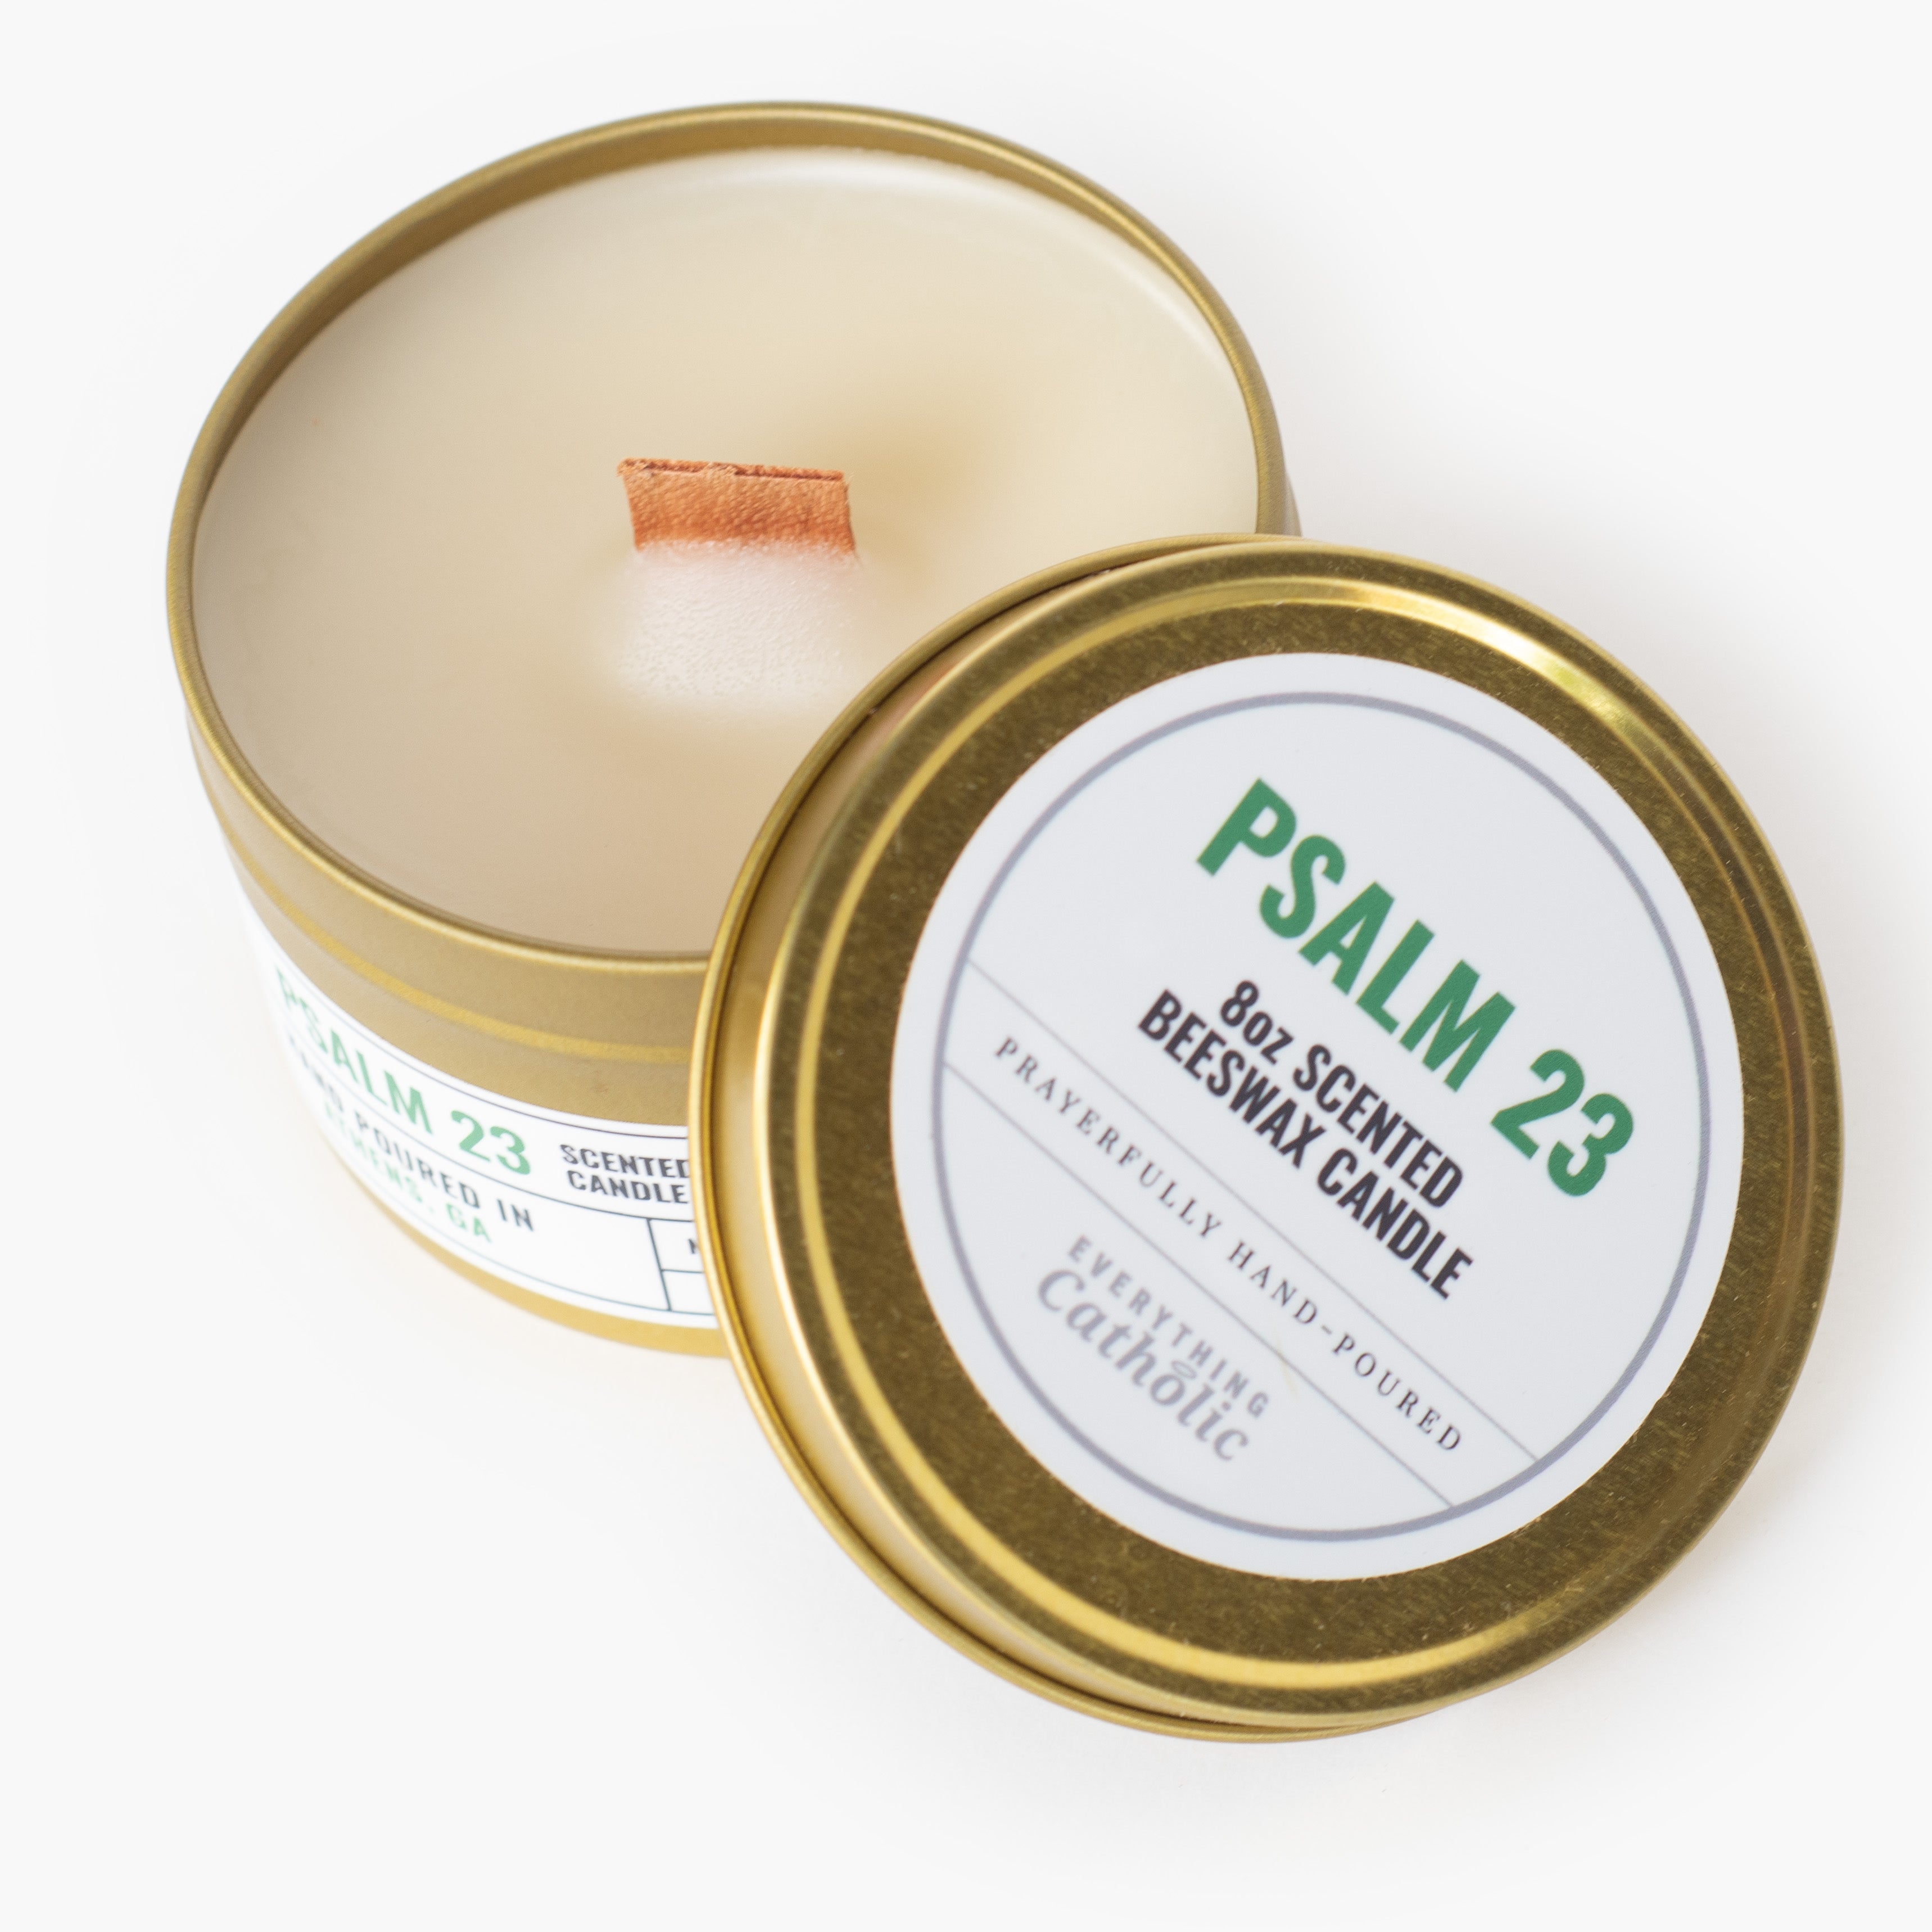 Psalm 23 Beeswax Candle